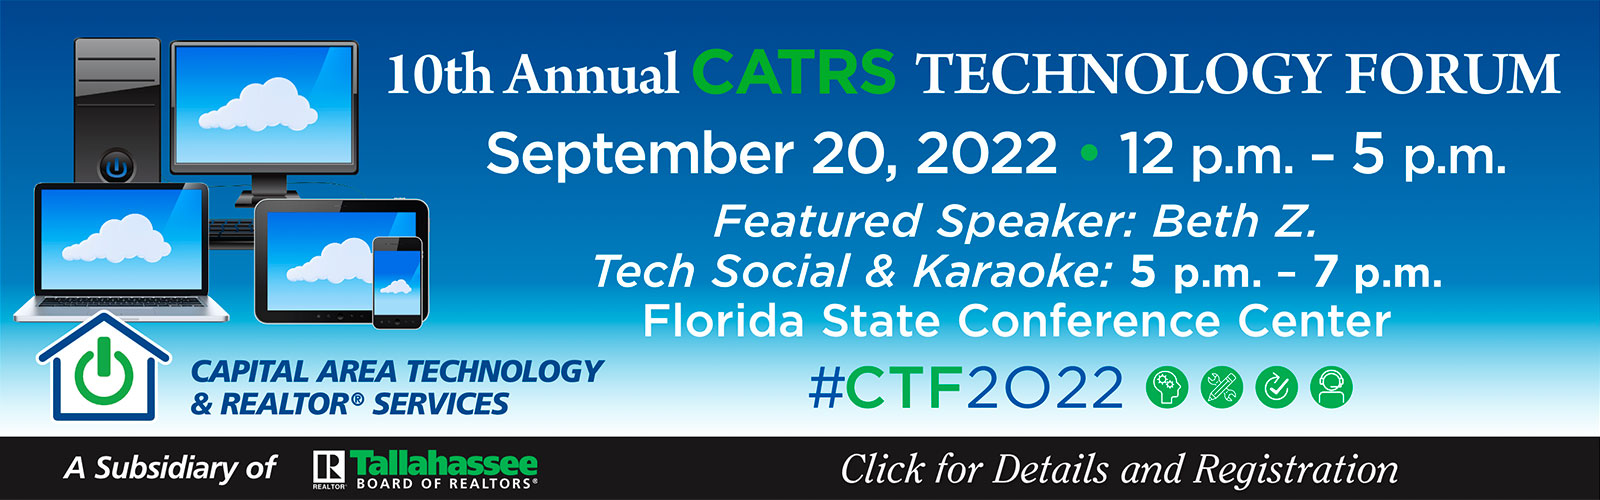 10th Annual CATRS Technology Forum